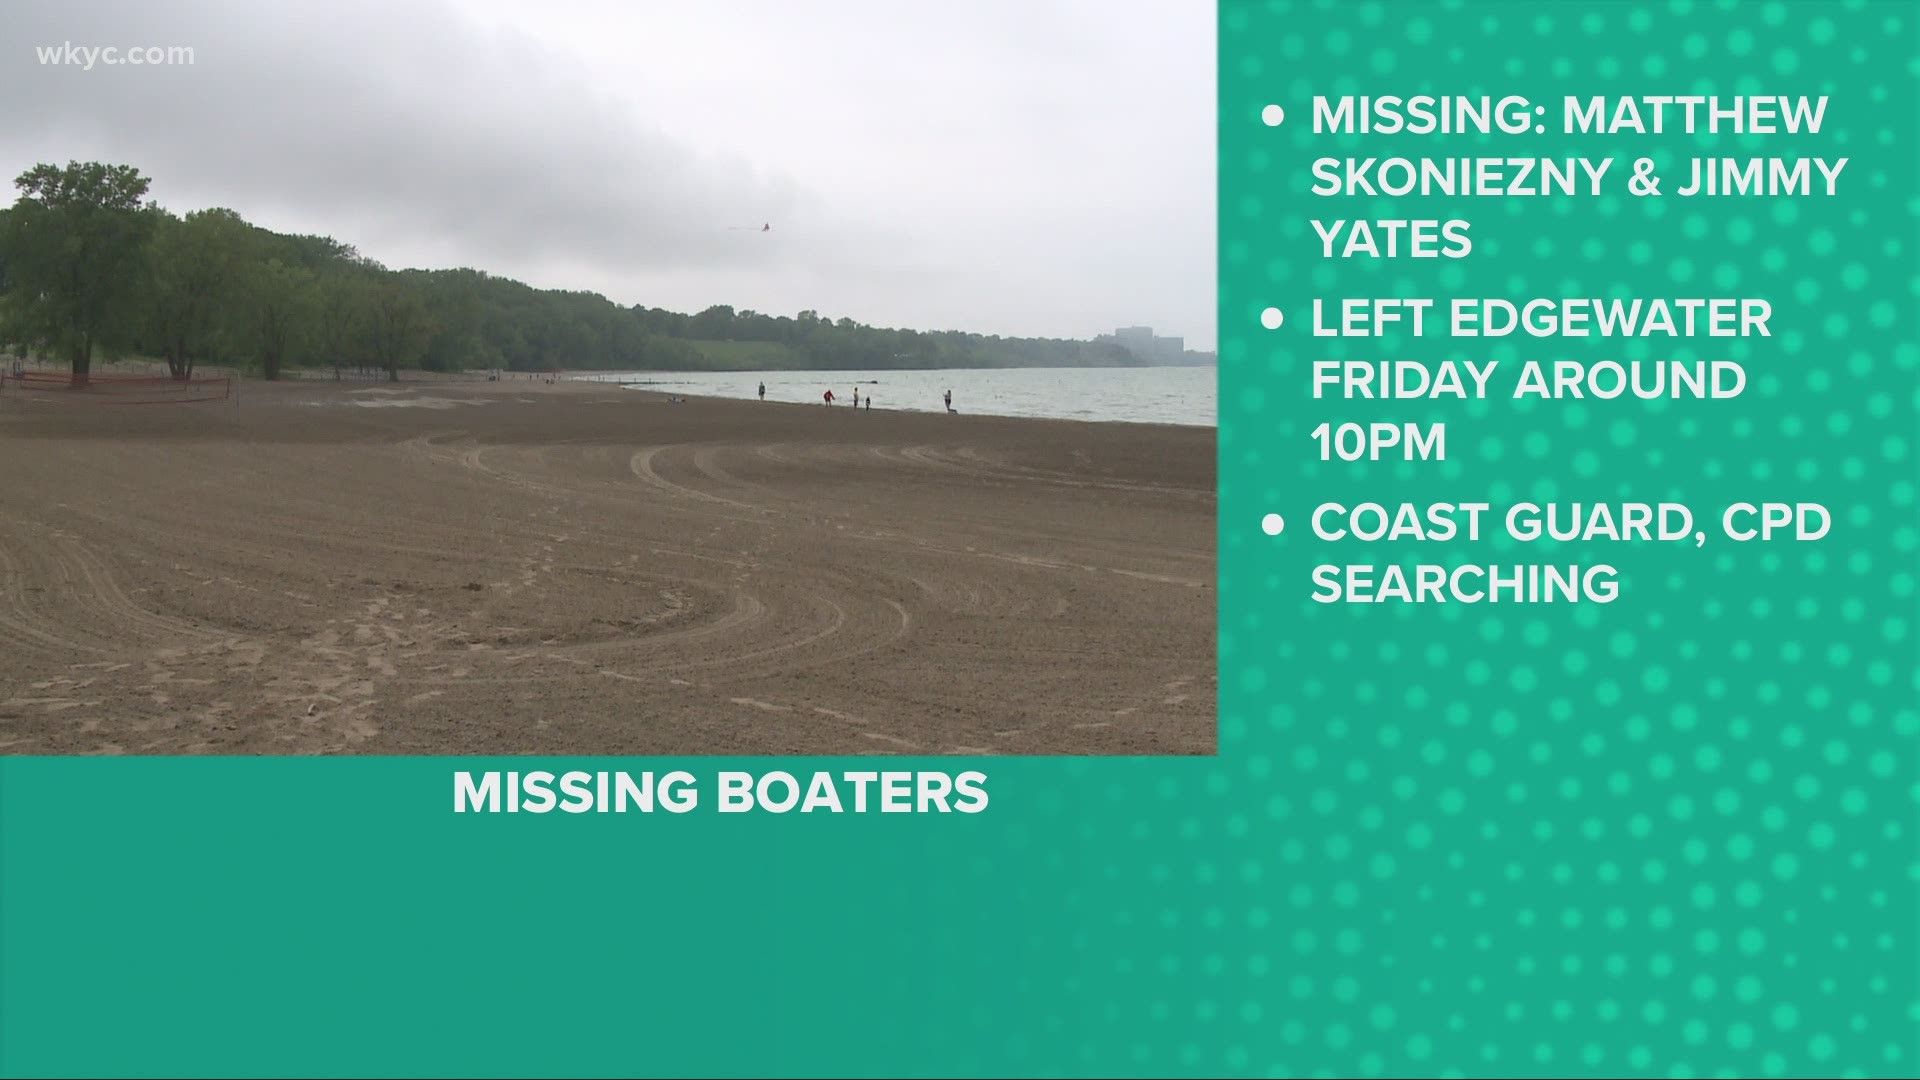 Nov. 29, 2020: Authorities are searching for two missing boaters who left Edgewater late Friday night and haven't returned.